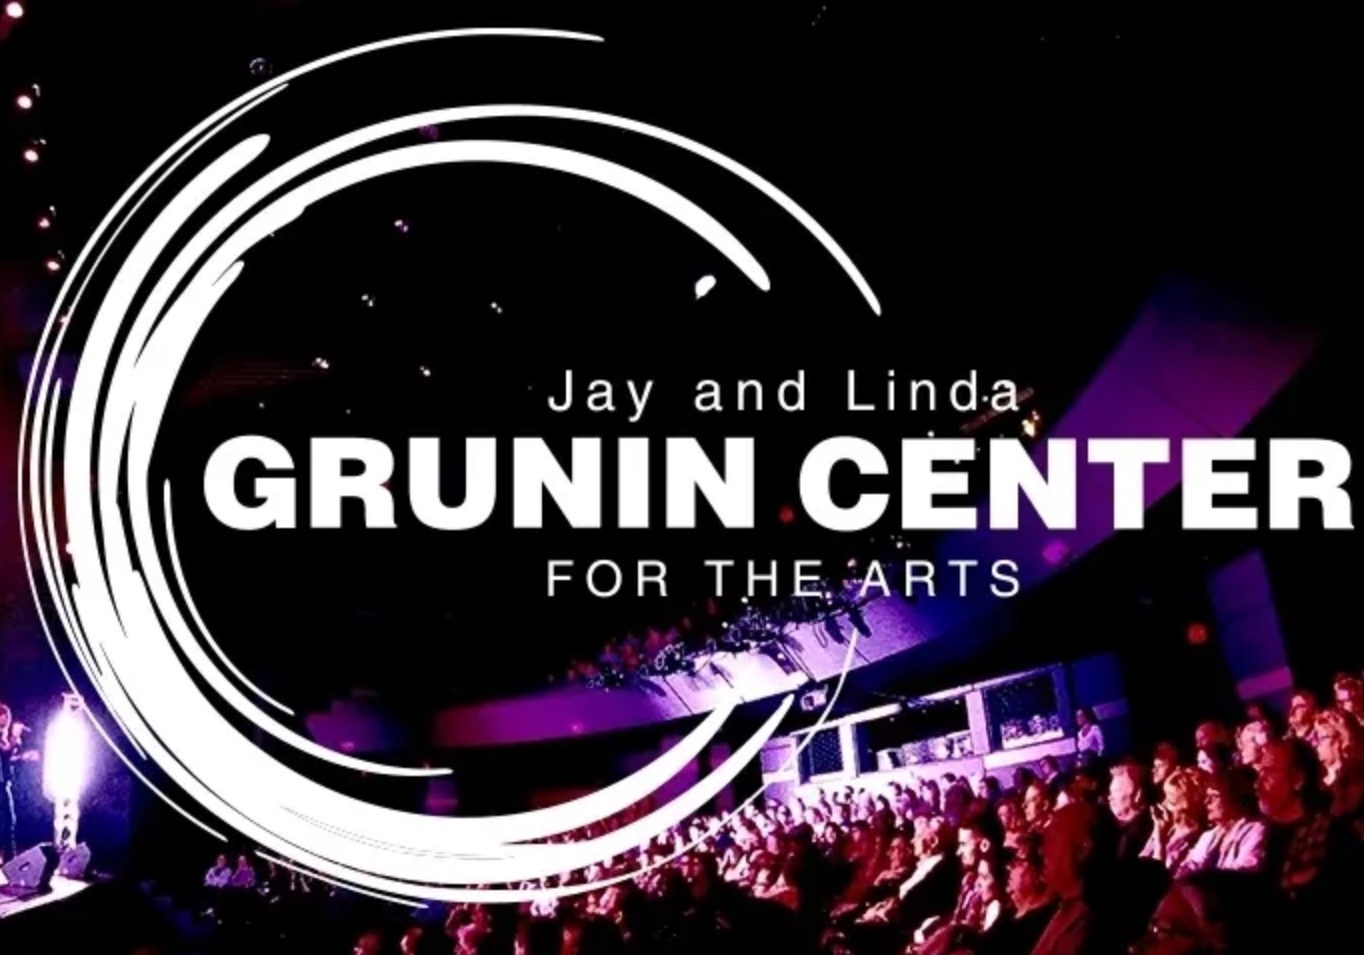 Jay and Linda Grunin Center for the Arts